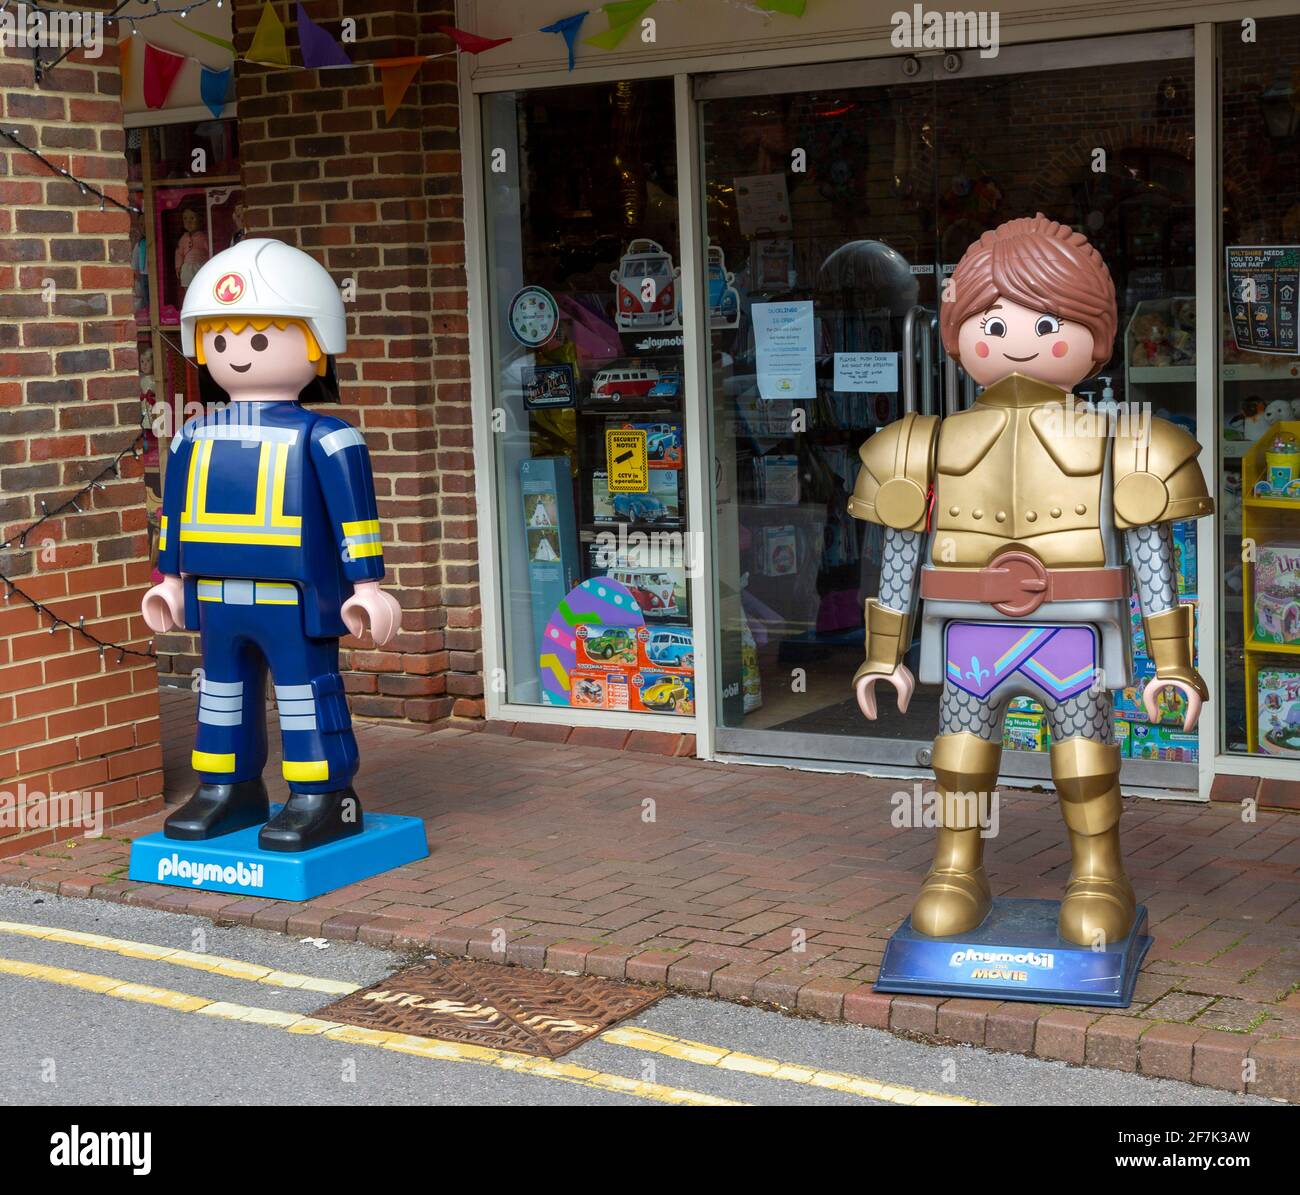 Playmobil Character High Resolution Stock Photography and Images - Alamy